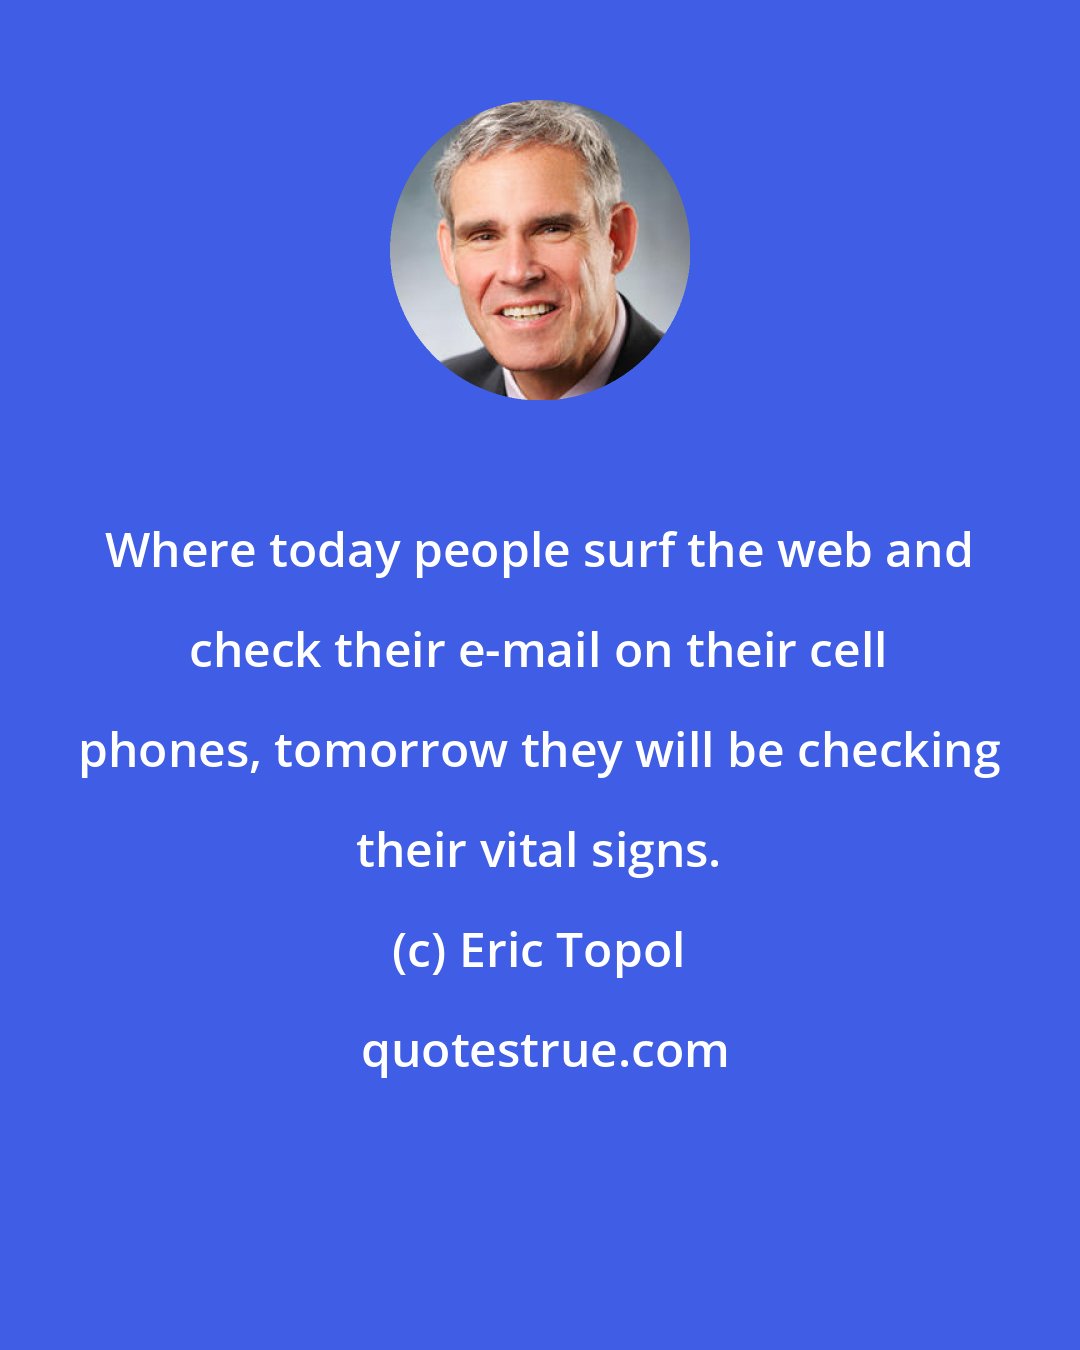 Eric Topol: Where today people surf the web and check their e-mail on their cell phones, tomorrow they will be checking their vital signs.